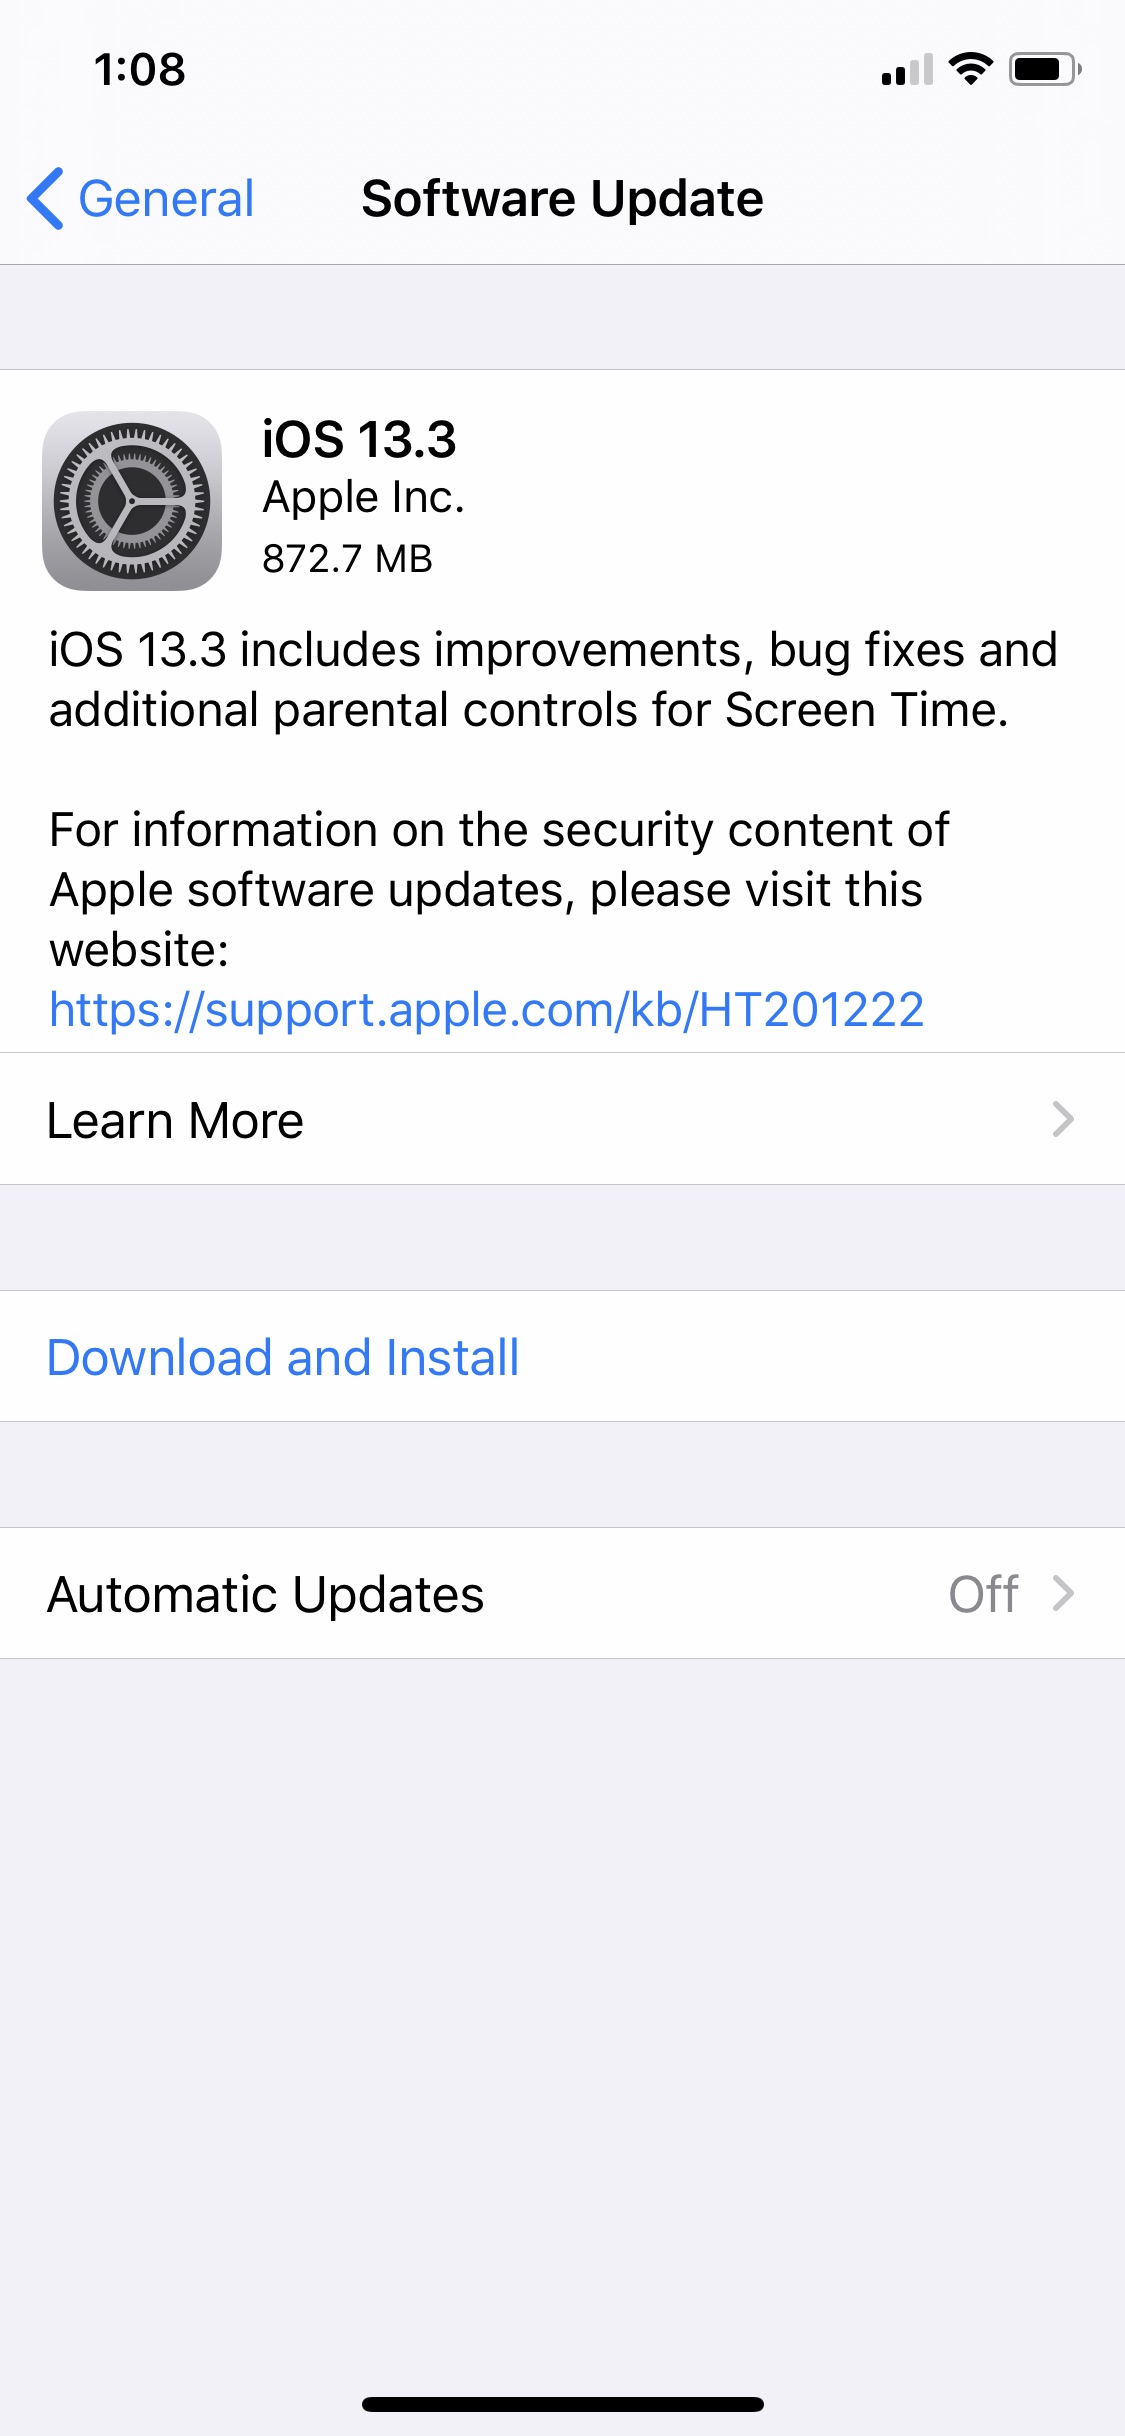 Apple Releases iOS 13.3 and iPadOS 13.3 [Download]